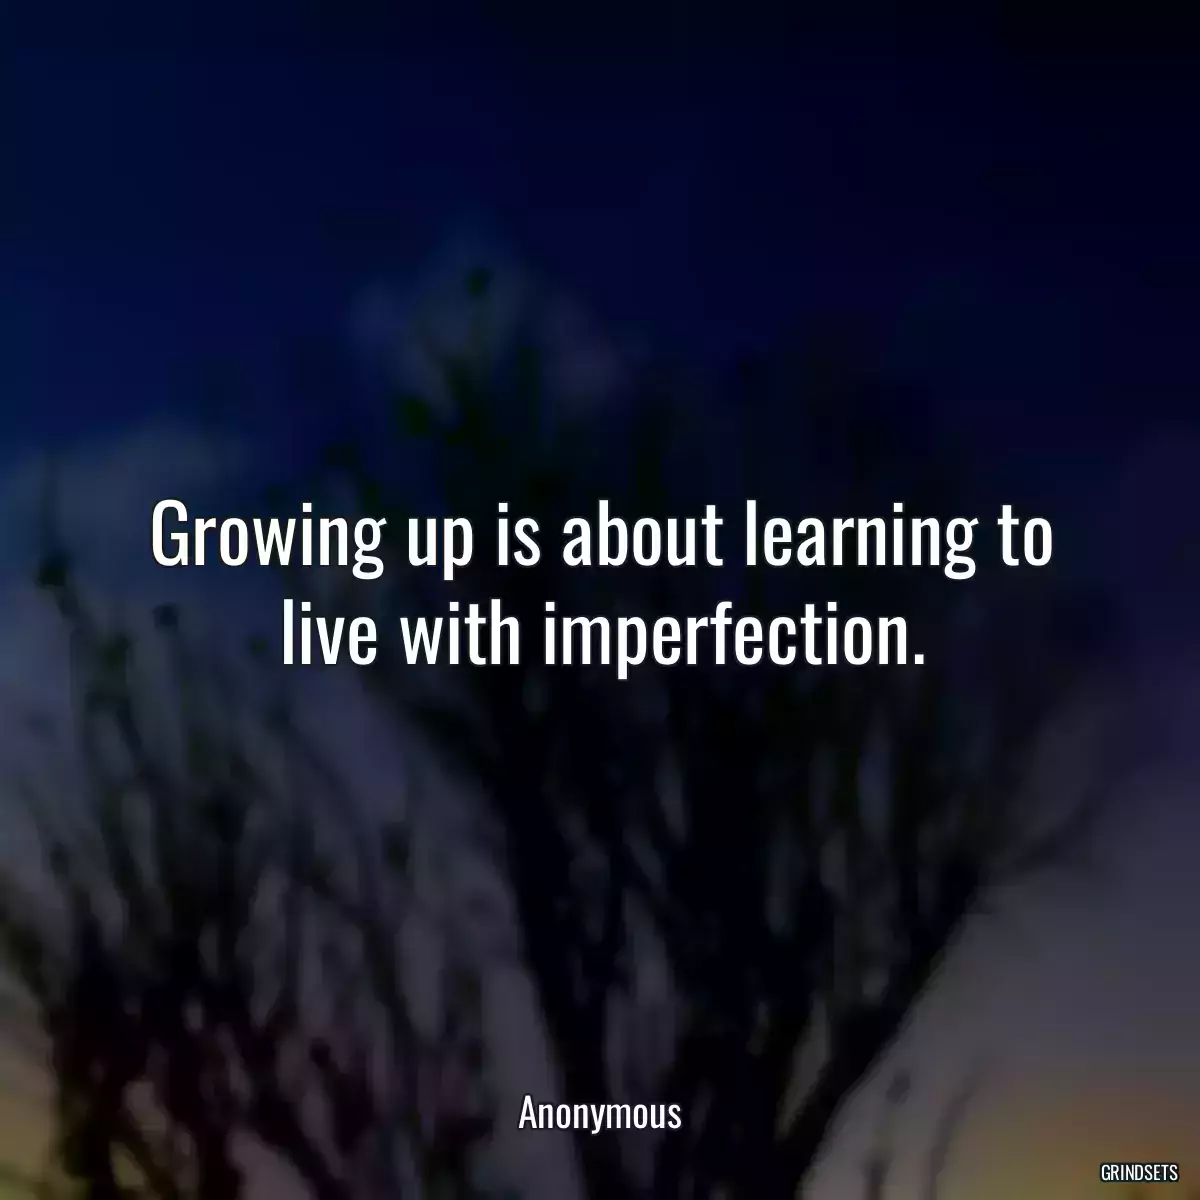 Growing up is about learning to live with imperfection.